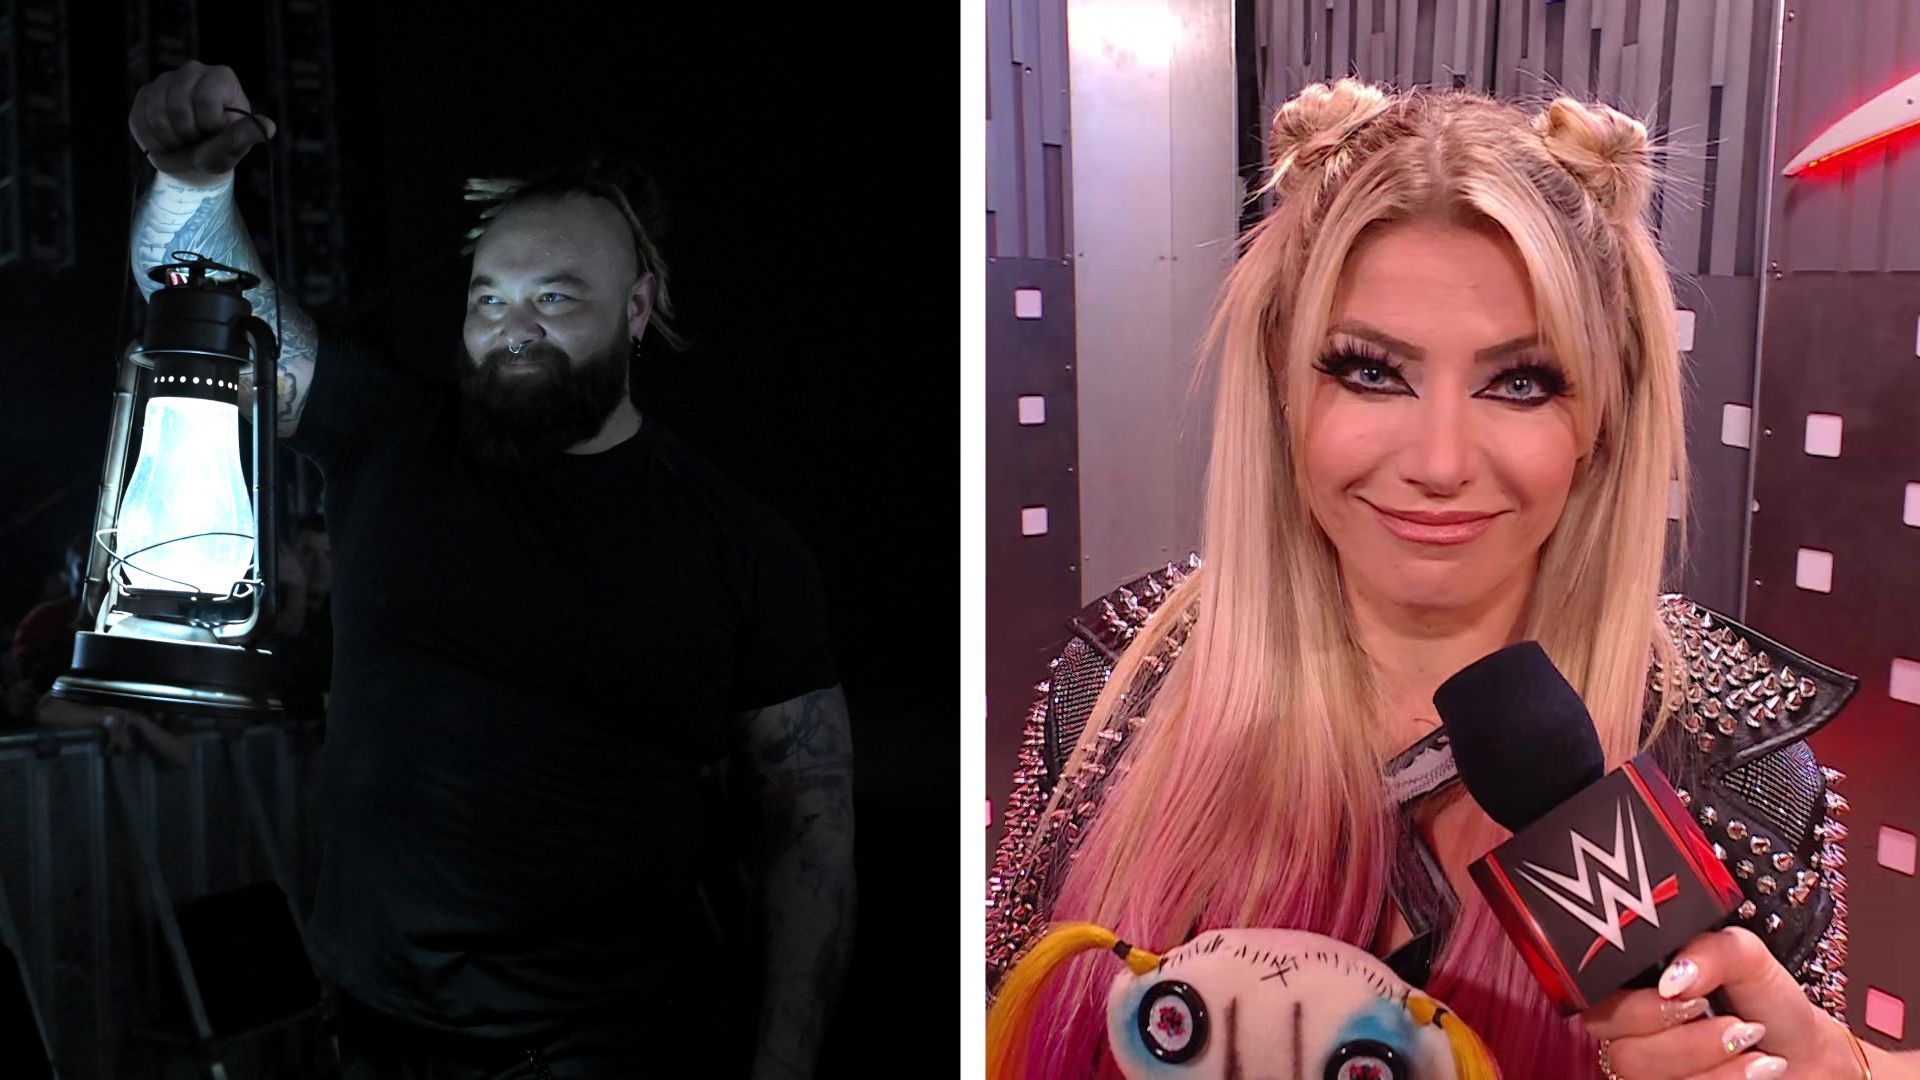 Several female stars could potentially join Bray Wyatt in WWE